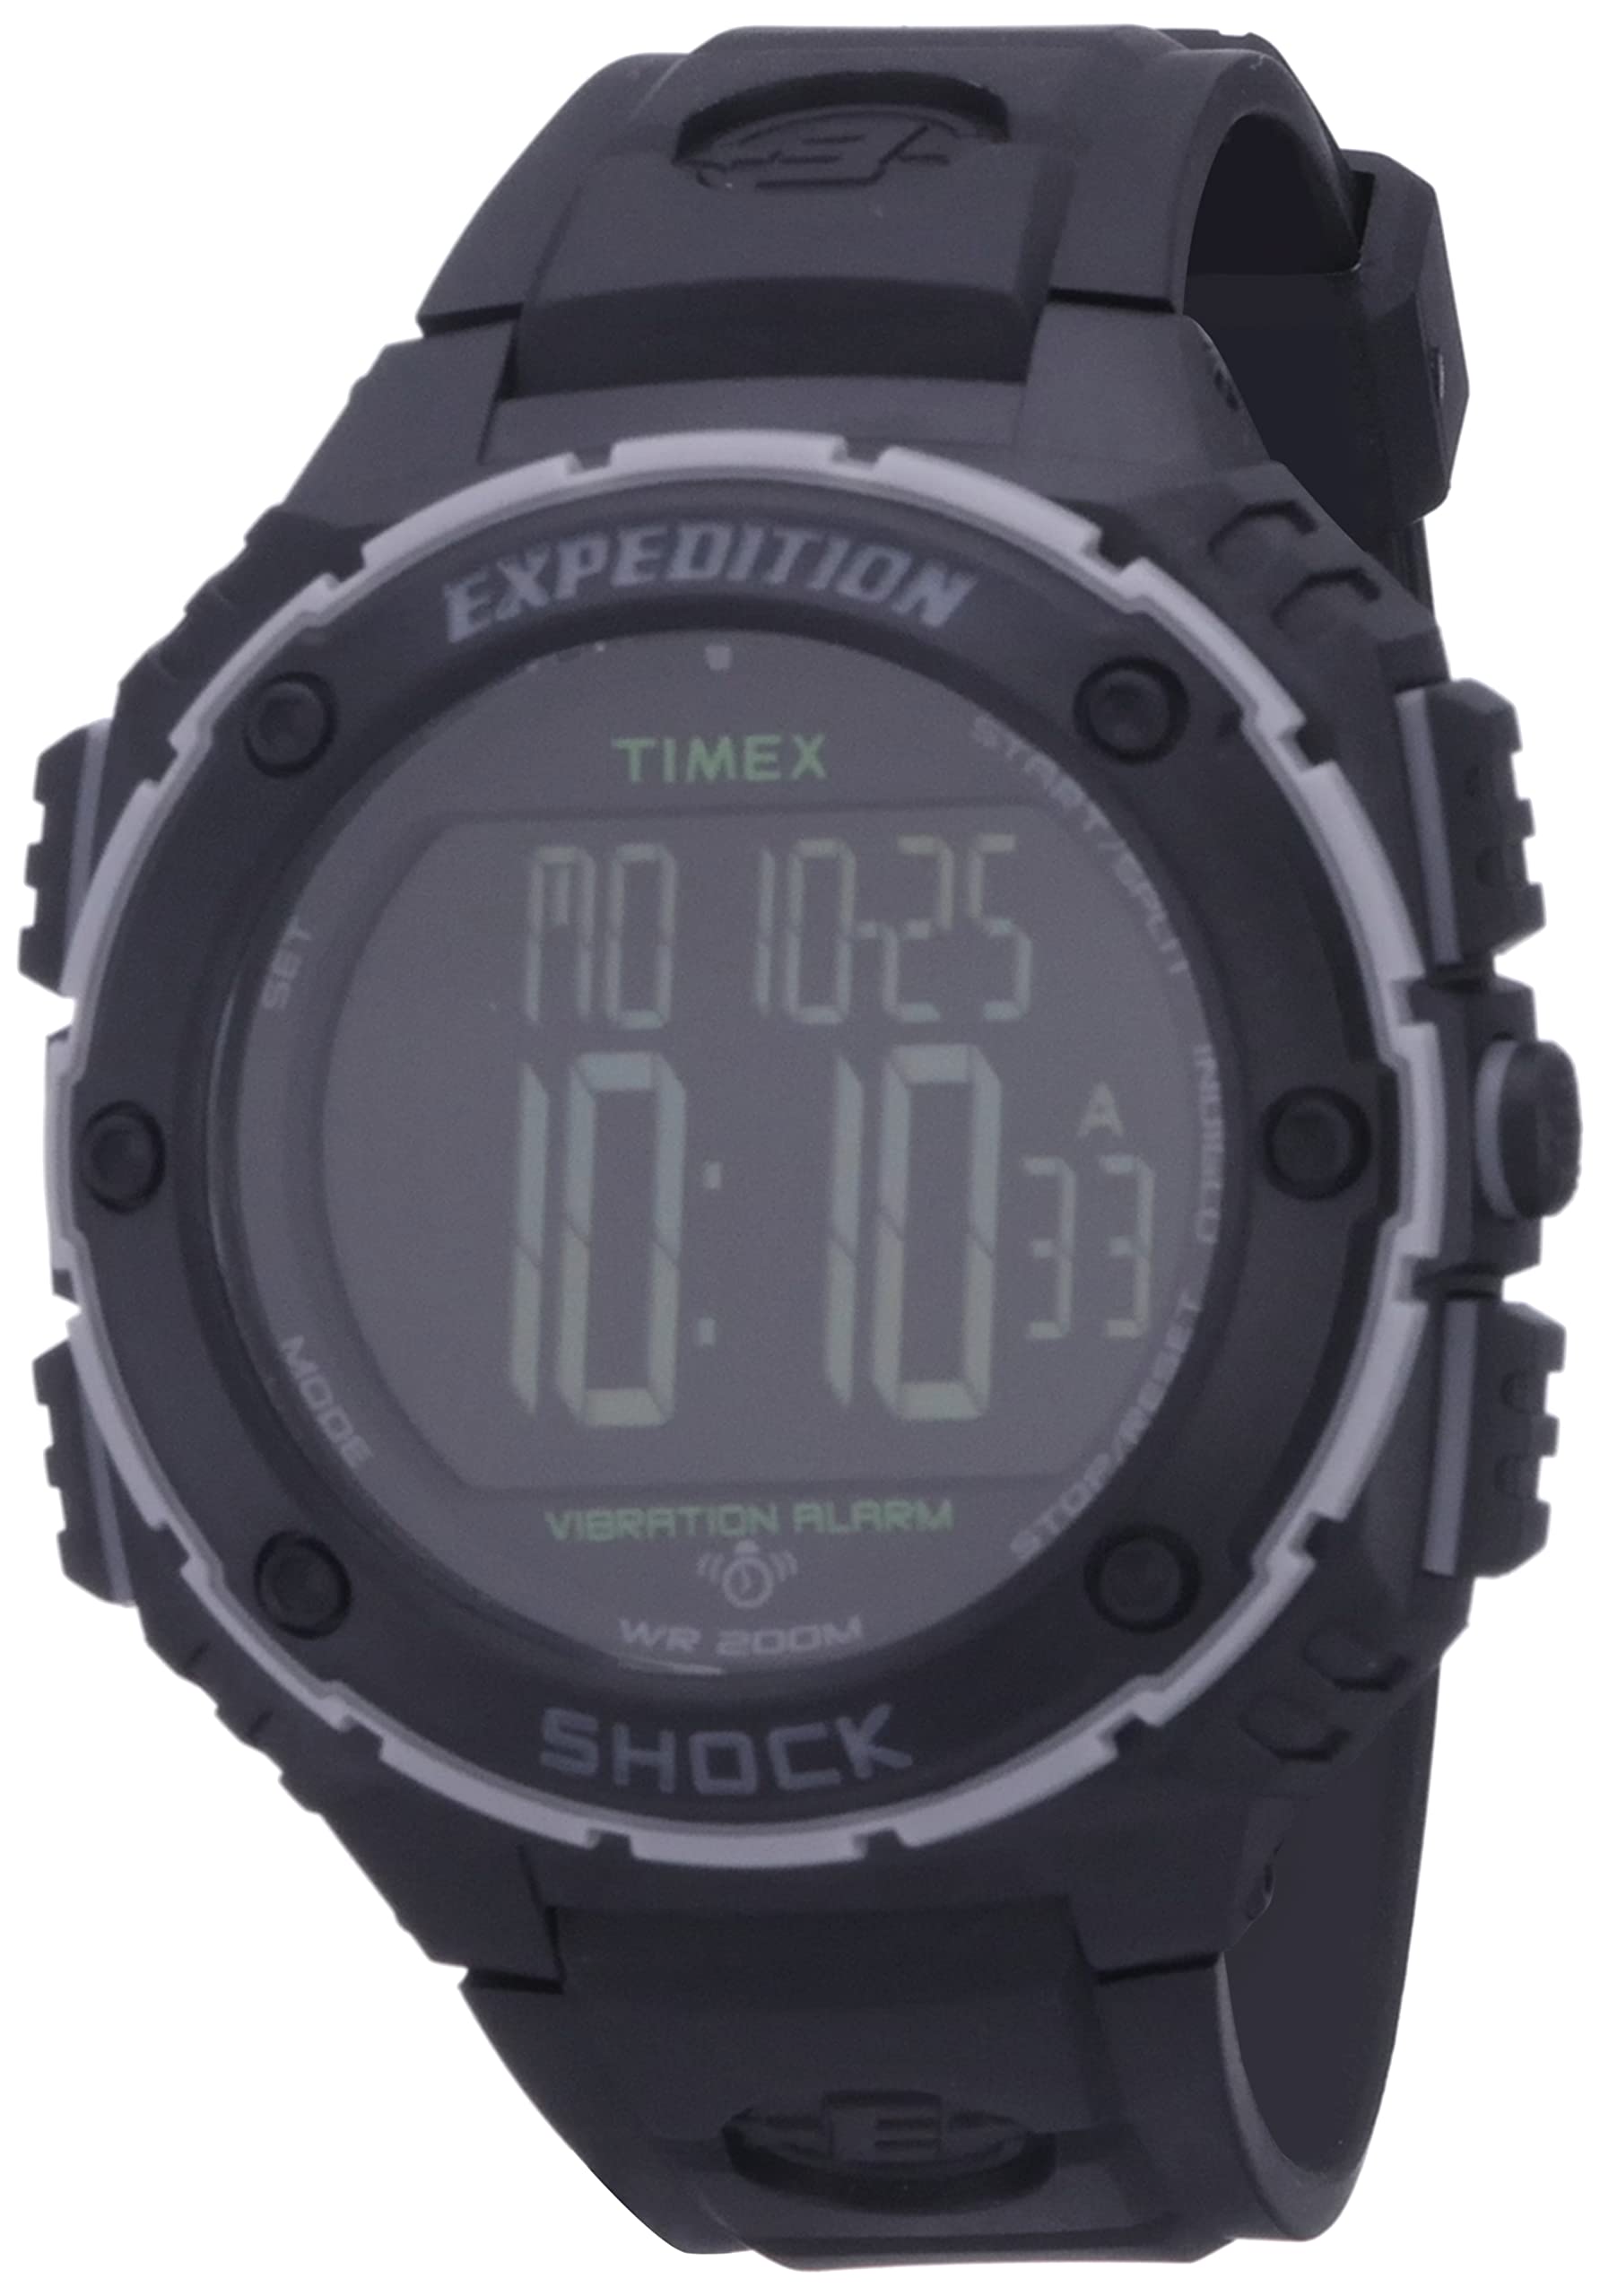 Timex Men's Expedition Shock XL Vibrating Alarm 50mm Watch